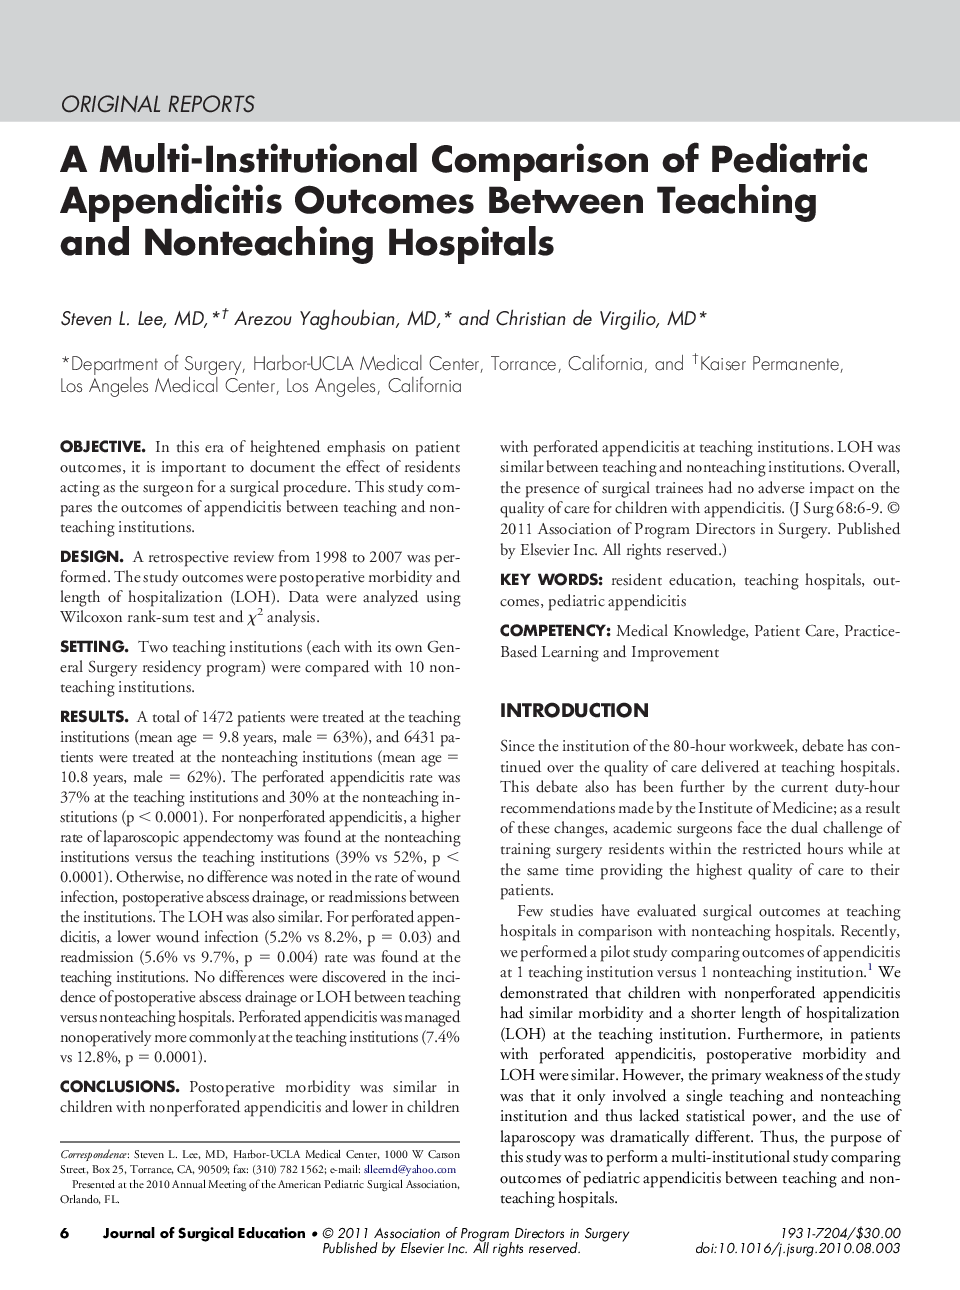 A Multi-Institutional Comparison of Pediatric Appendicitis Outcomes Between Teaching and Nonteaching Hospitals